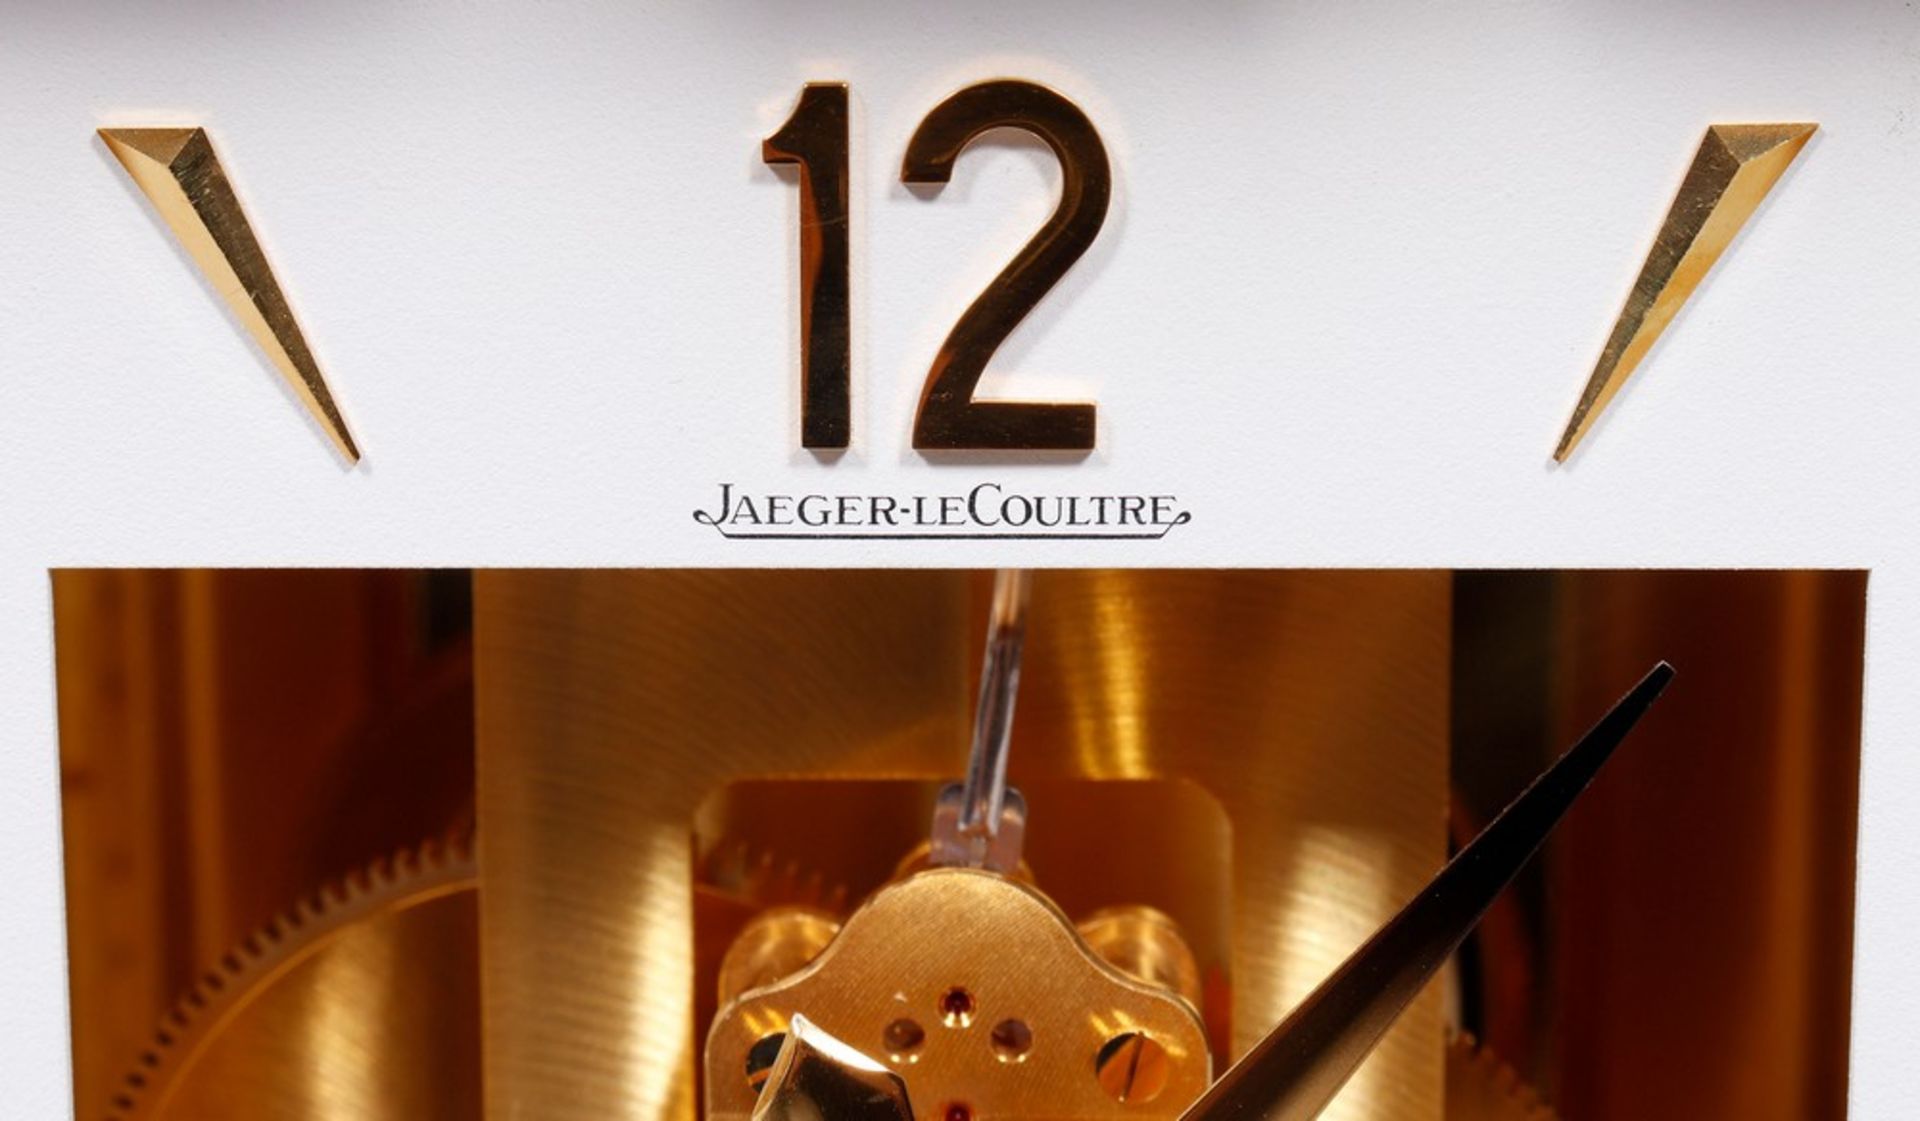 Table clock, Jaeger-LeCoultre, Switzerland, 1970s - Image 5 of 10